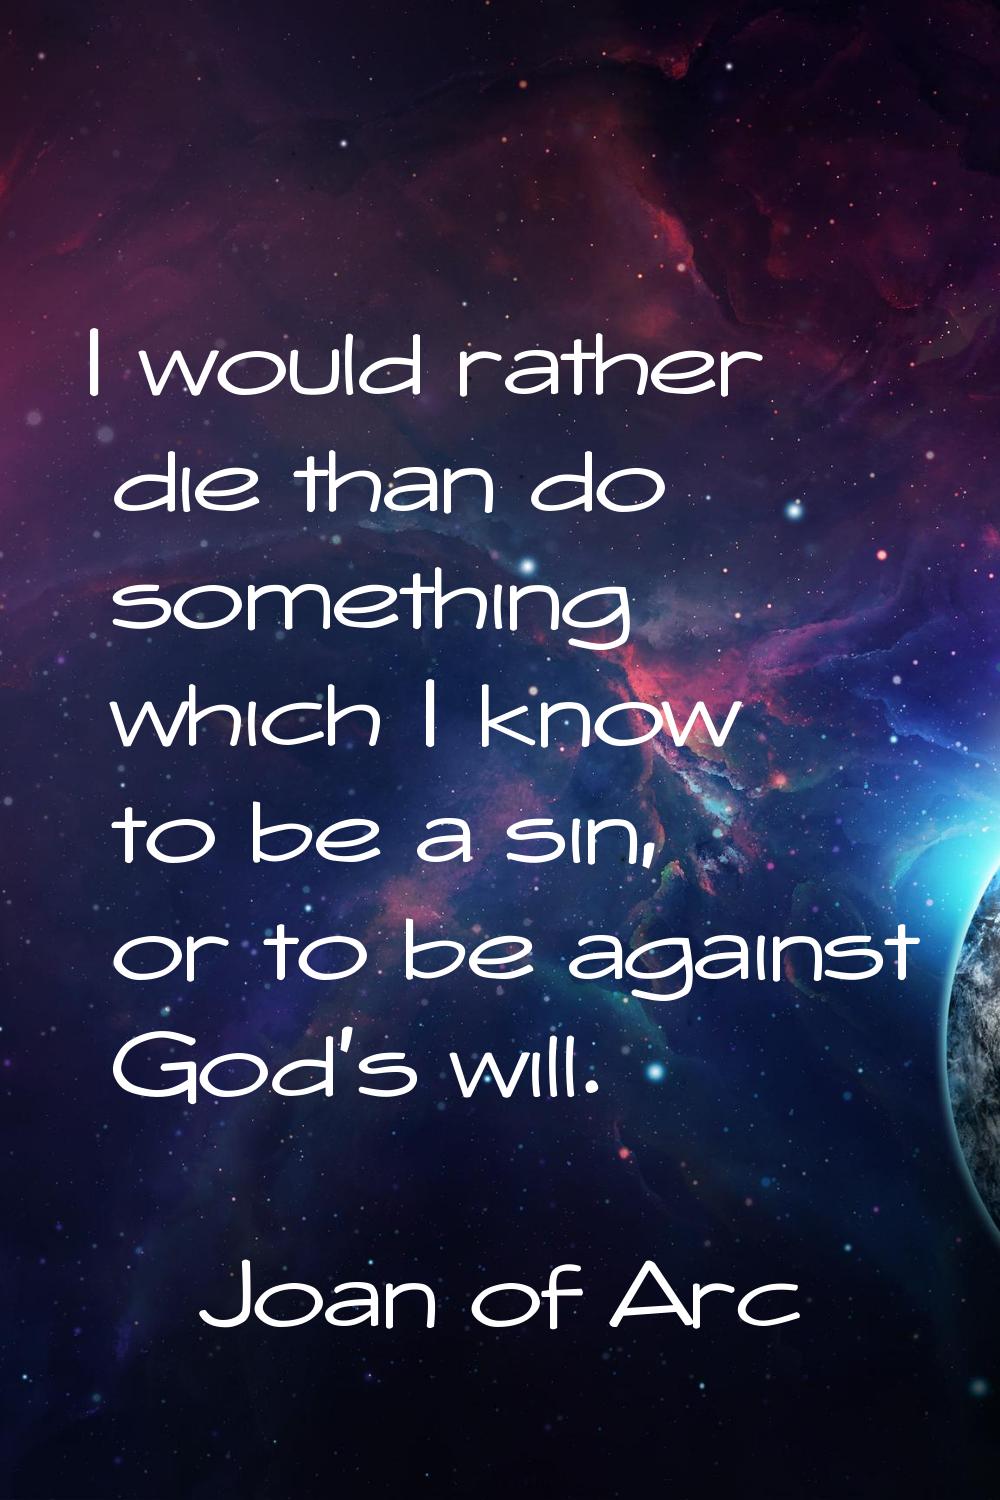 I would rather die than do something which I know to be a sin, or to be against God's will.